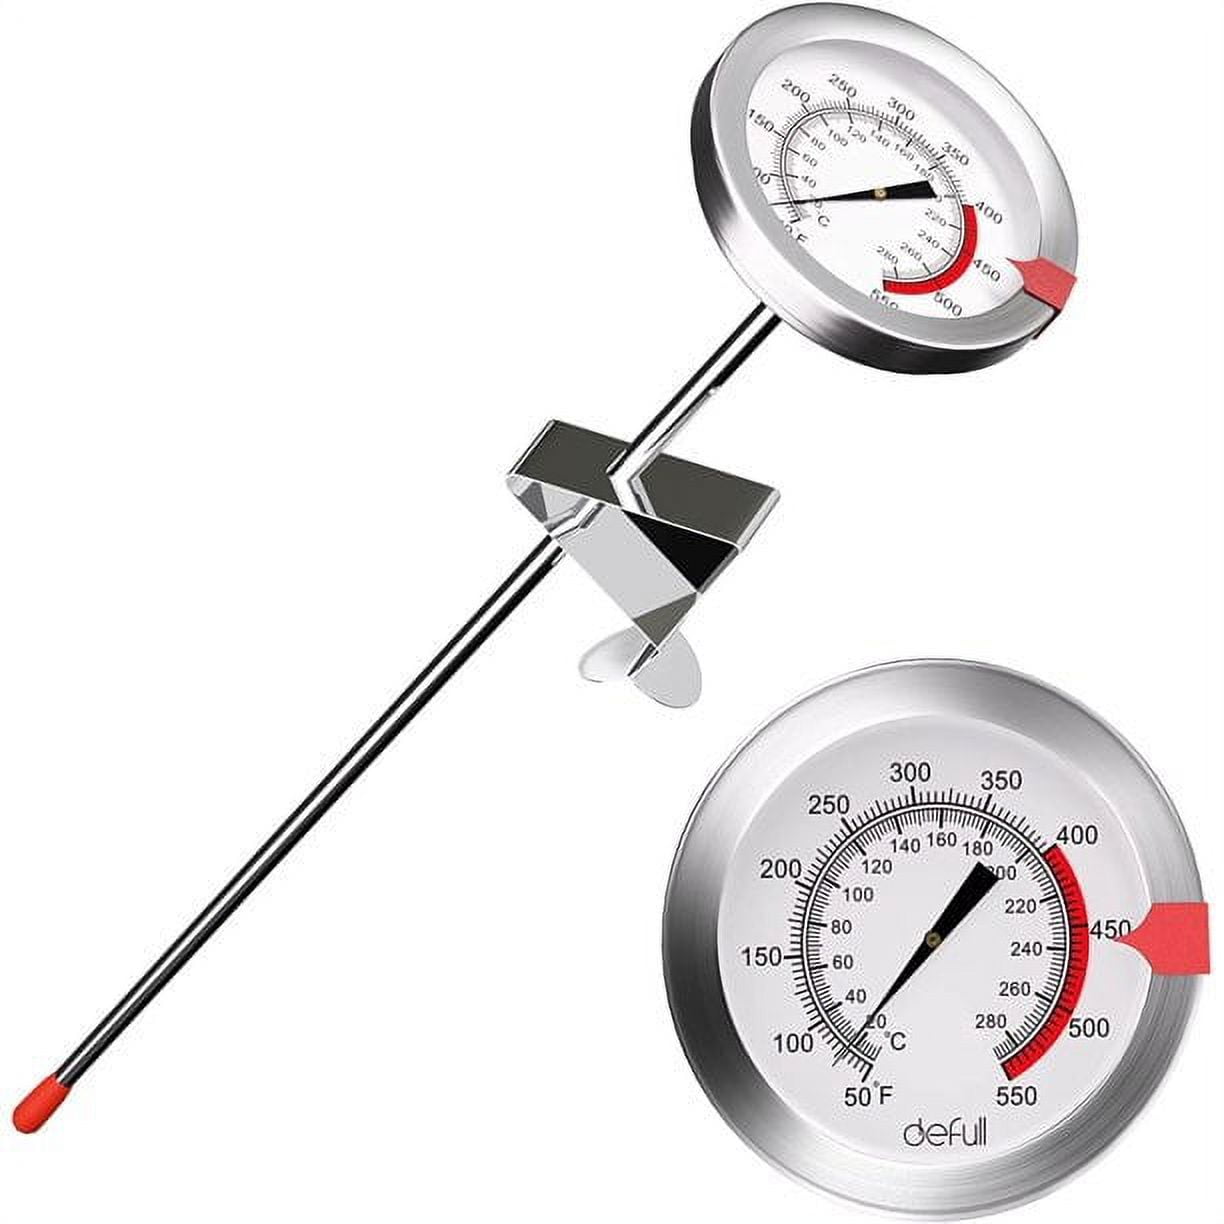 Oil Thermometer, Candy Thermometer - 8-Inch Instant Read Large Dial Oil  Thermometer for Frying Oil, BBQ Grilling, Cooking, Turkey (4 PCS) 